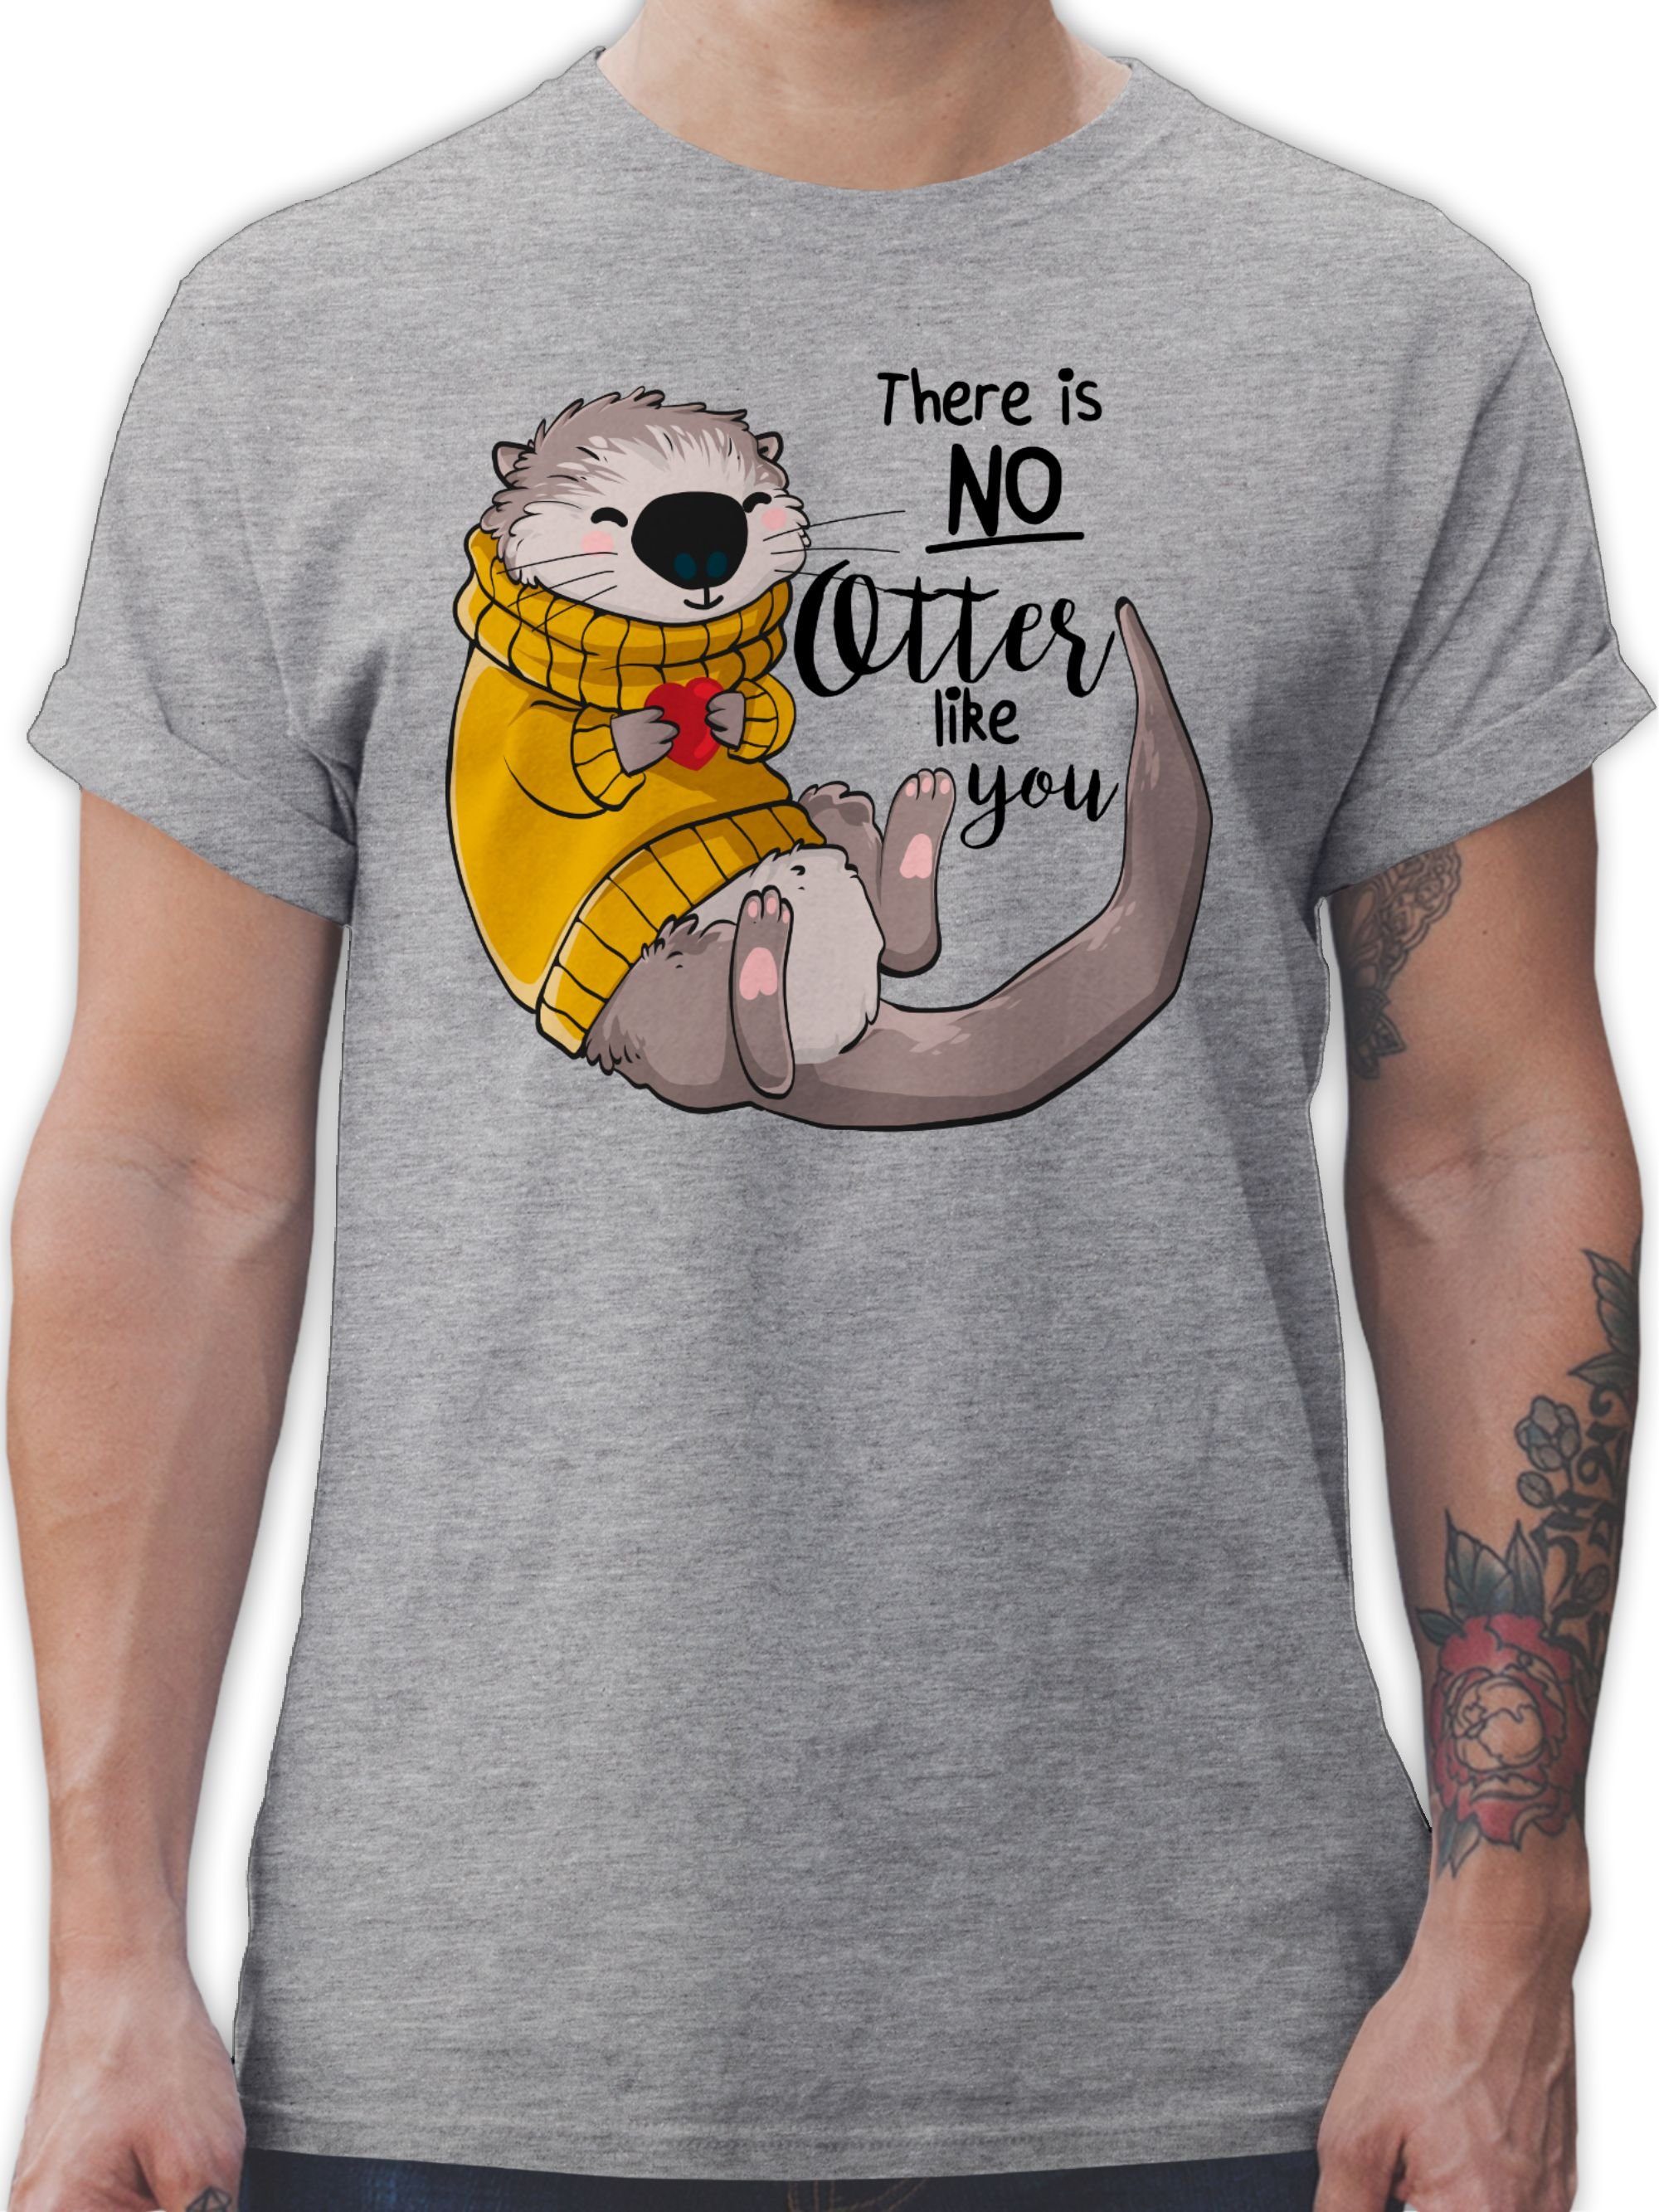 Shirtracer T-Shirt There is no Otter like you Sprüche Statement 2 Grau meliert